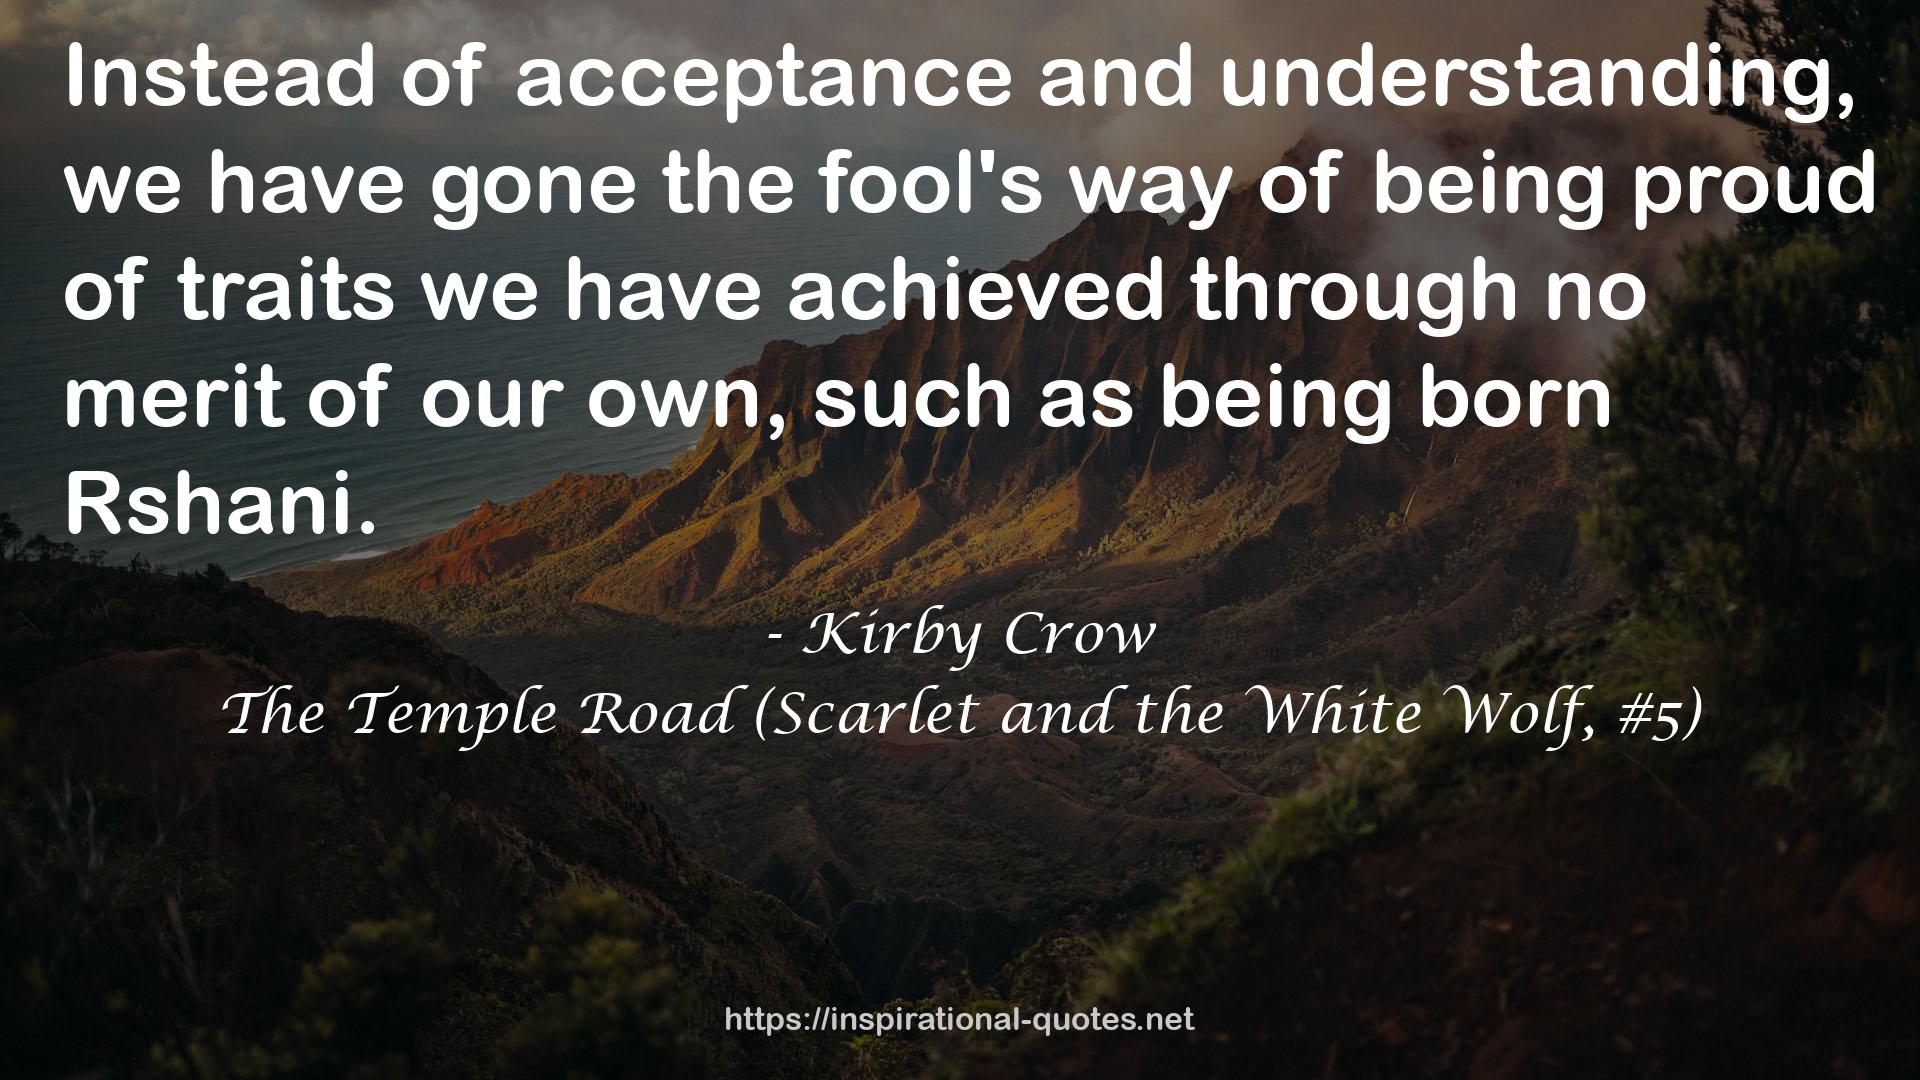 The Temple Road (Scarlet and the White Wolf, #5) QUOTES